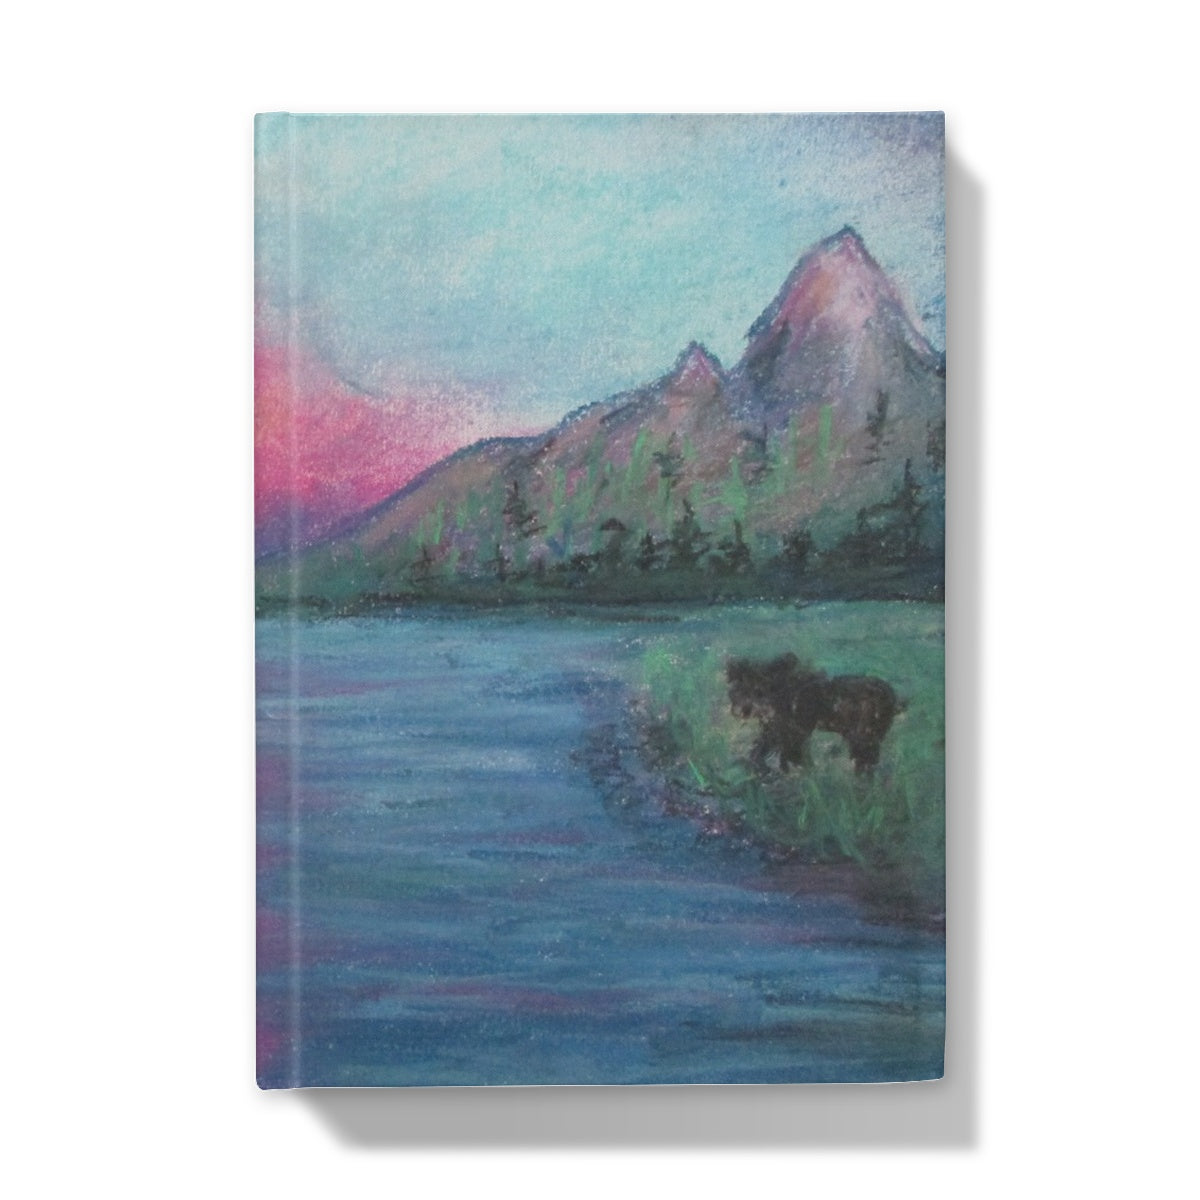 Poet and her Soul Speaking Paintings ~  prints, originals and more  Where the grass is greener View is cleaner Only because we earned it  Original Artwork and Poetry of Artist Jen Shearer    This is a original painting printed on product.